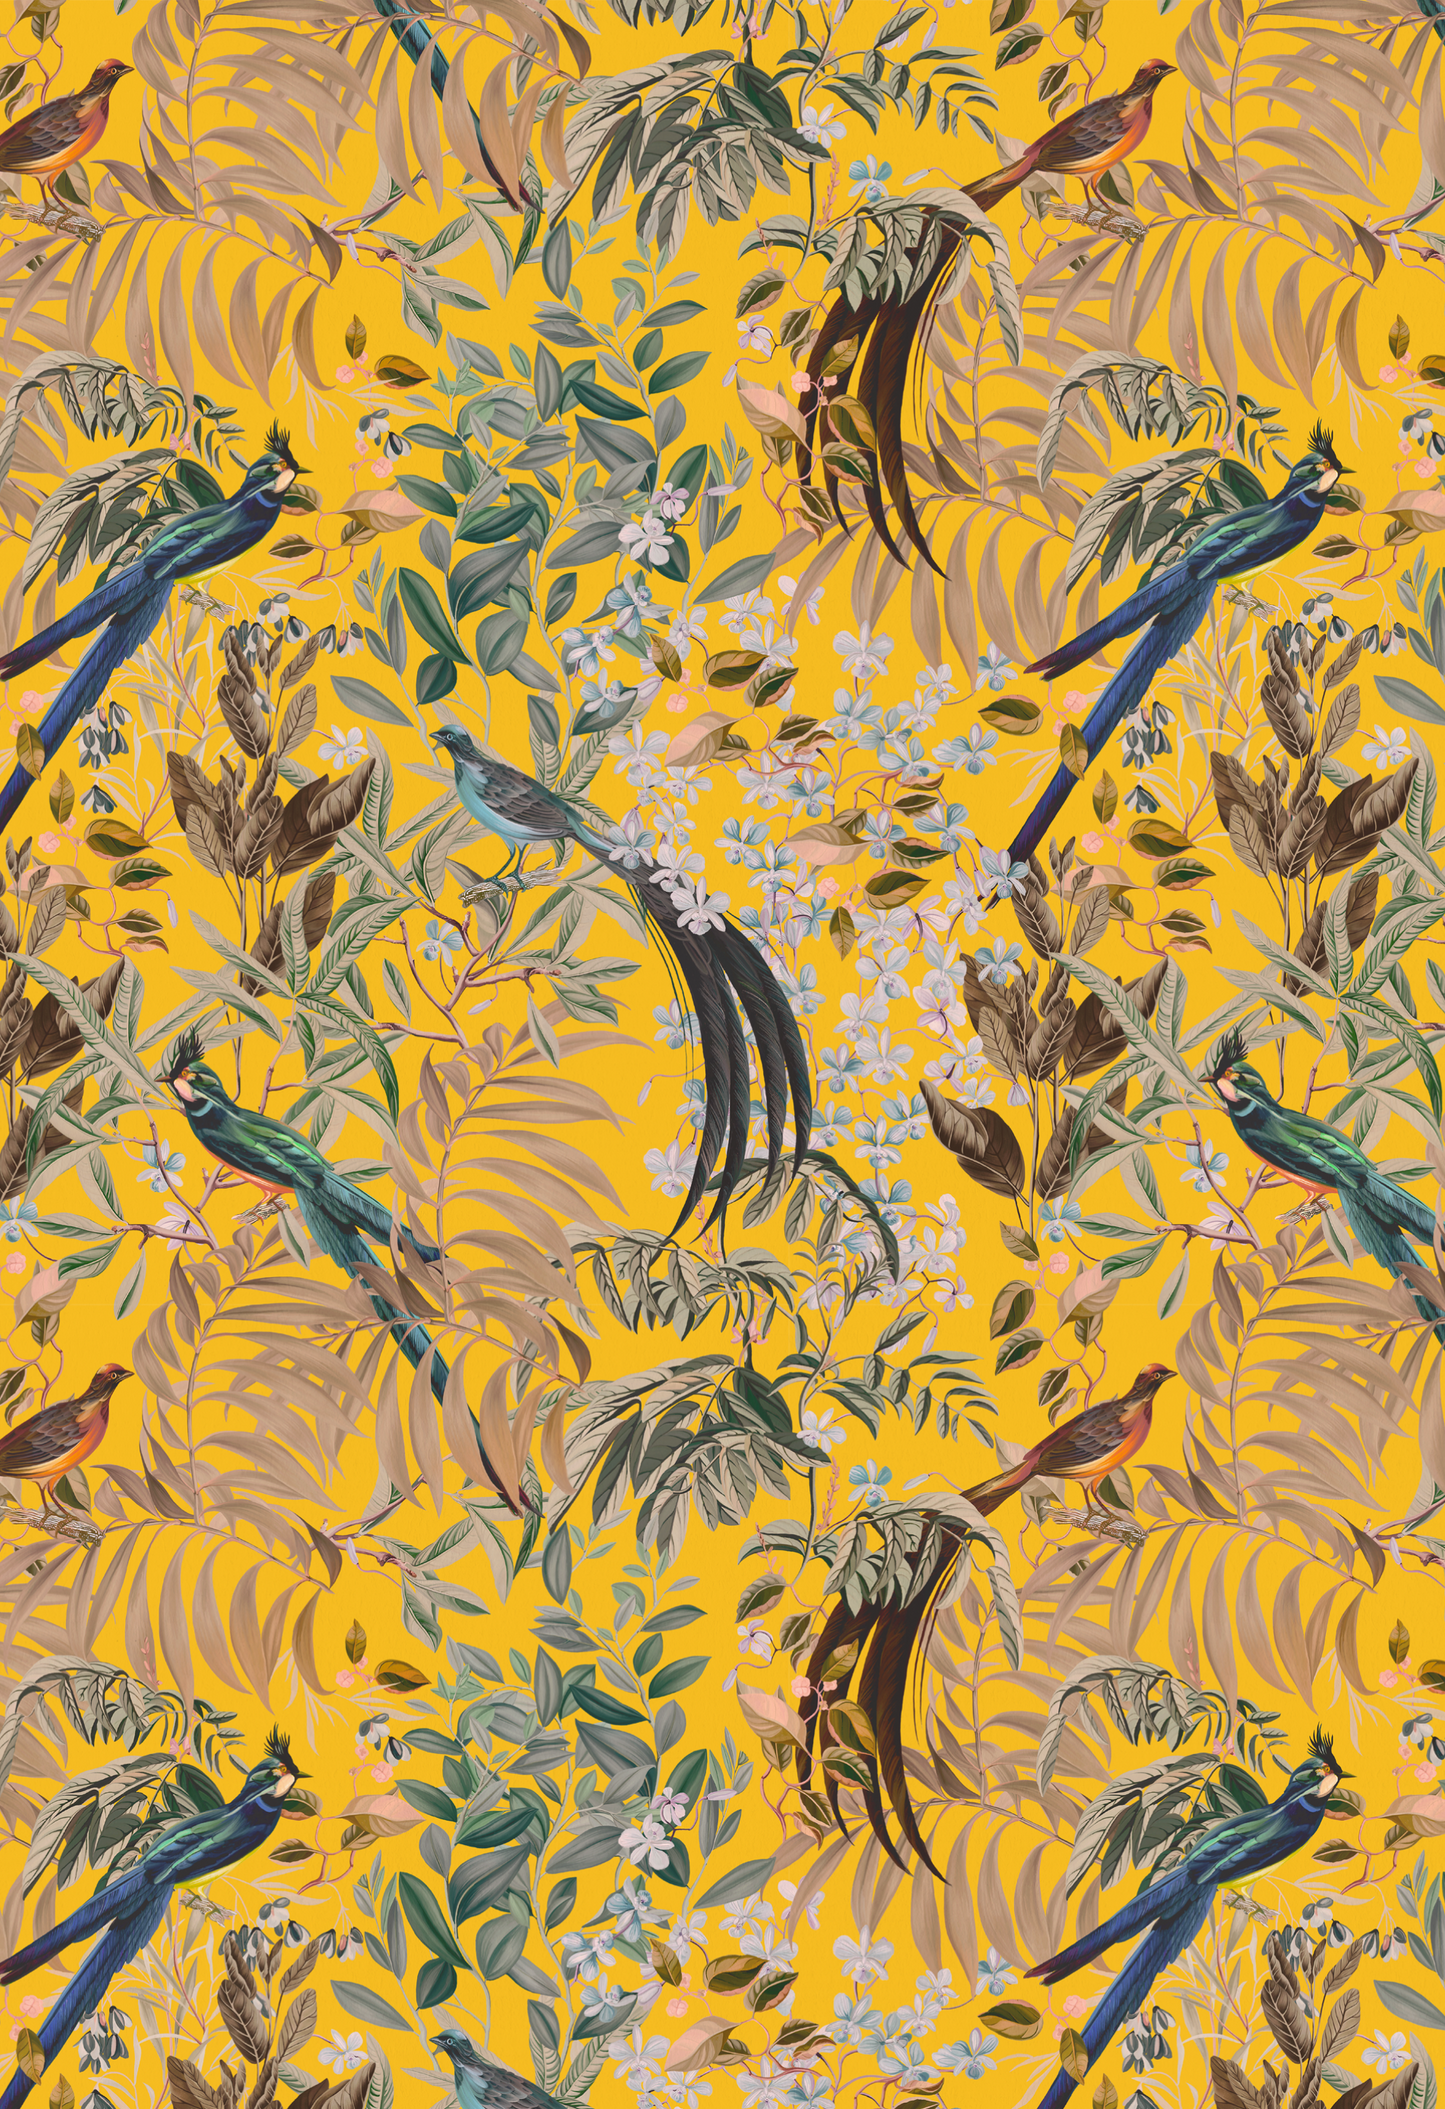 Fauna and flora pattern of botanical birds, flowers and leaves by Deus ex Gardenia of Resplendent Woods Wallpaper in India Yellow.